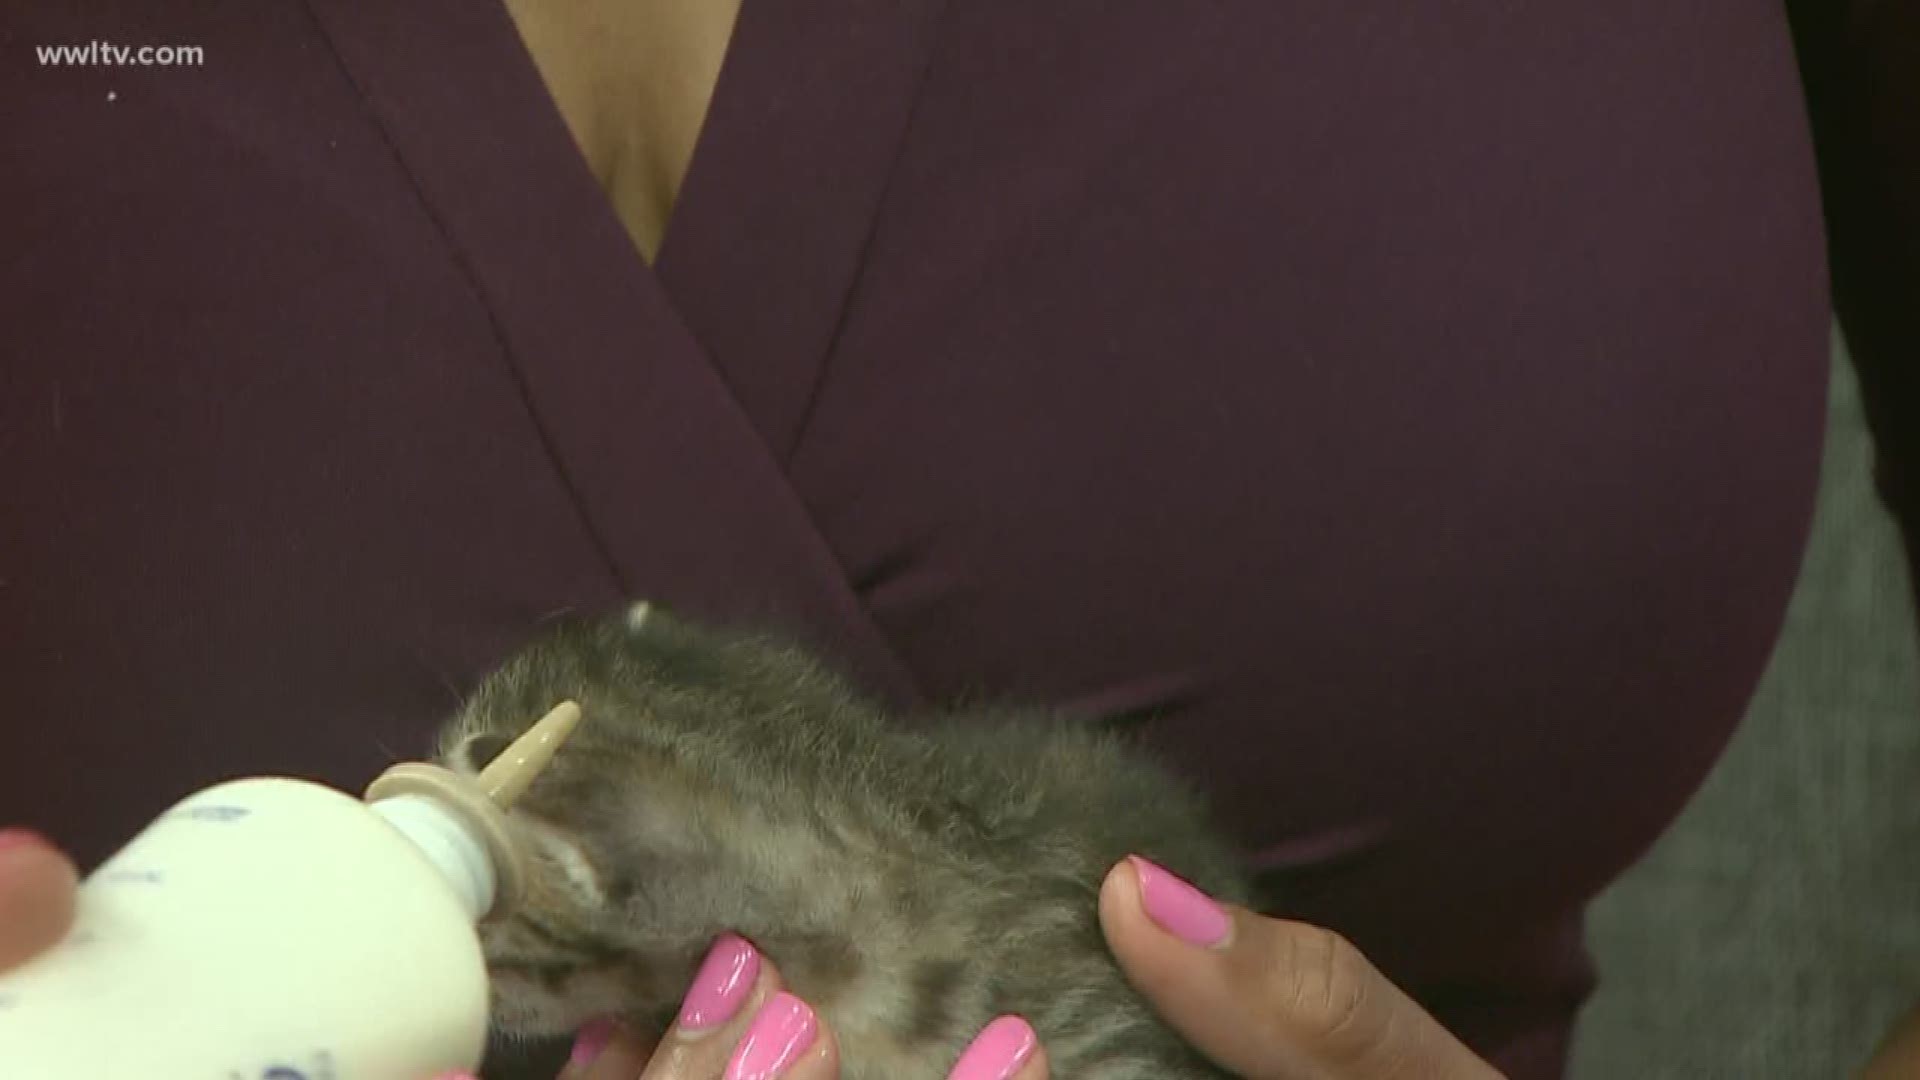 Sara Dawdy from LASPCA has some tips if you find a new born kitten in trouble.